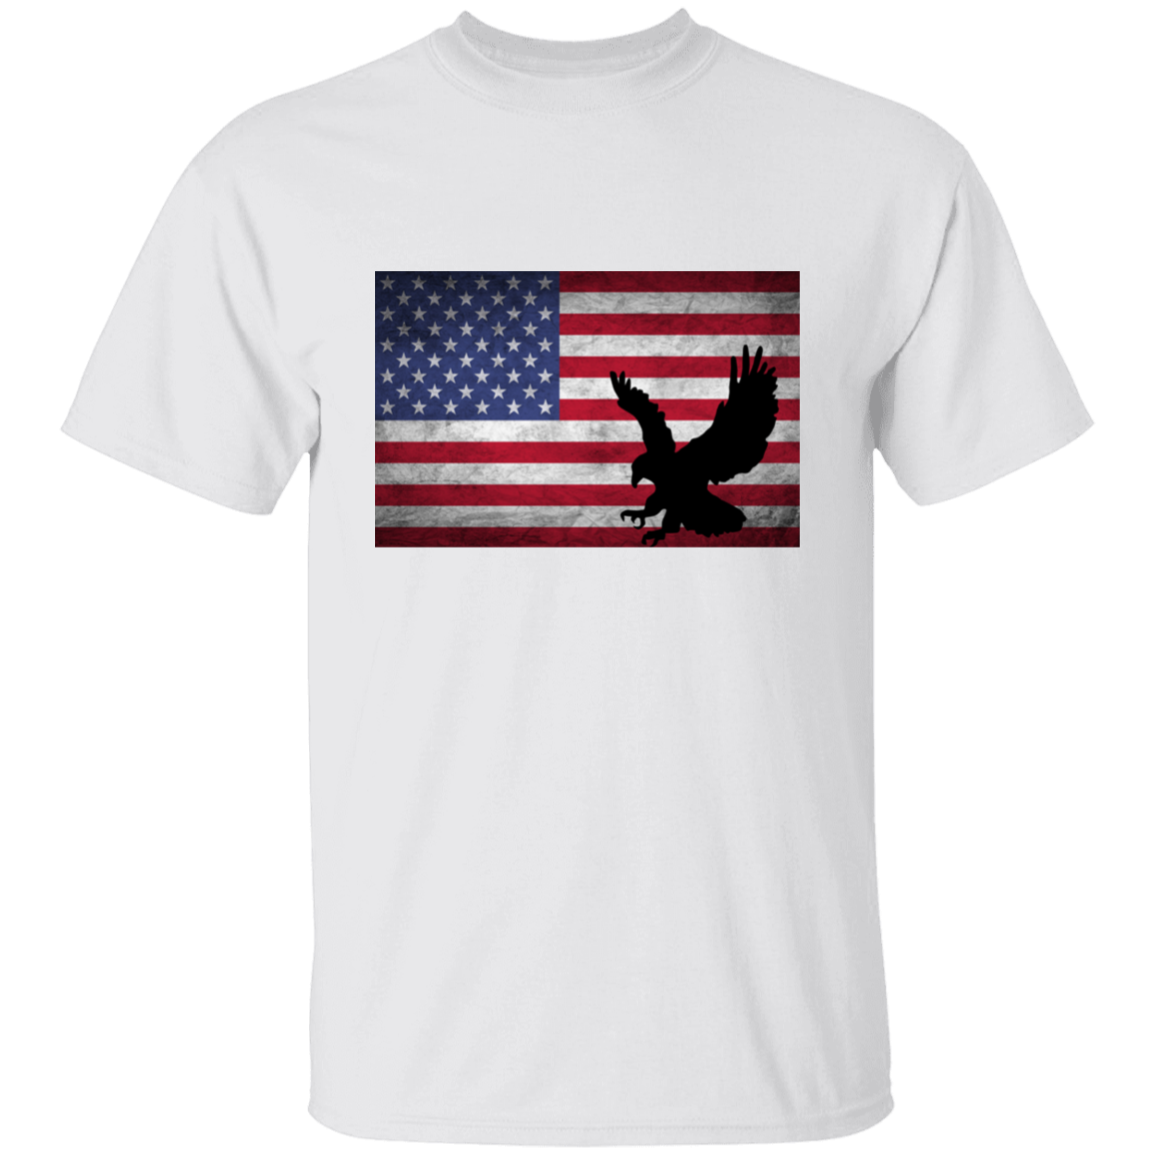 Flag with Eagle T-Shirt